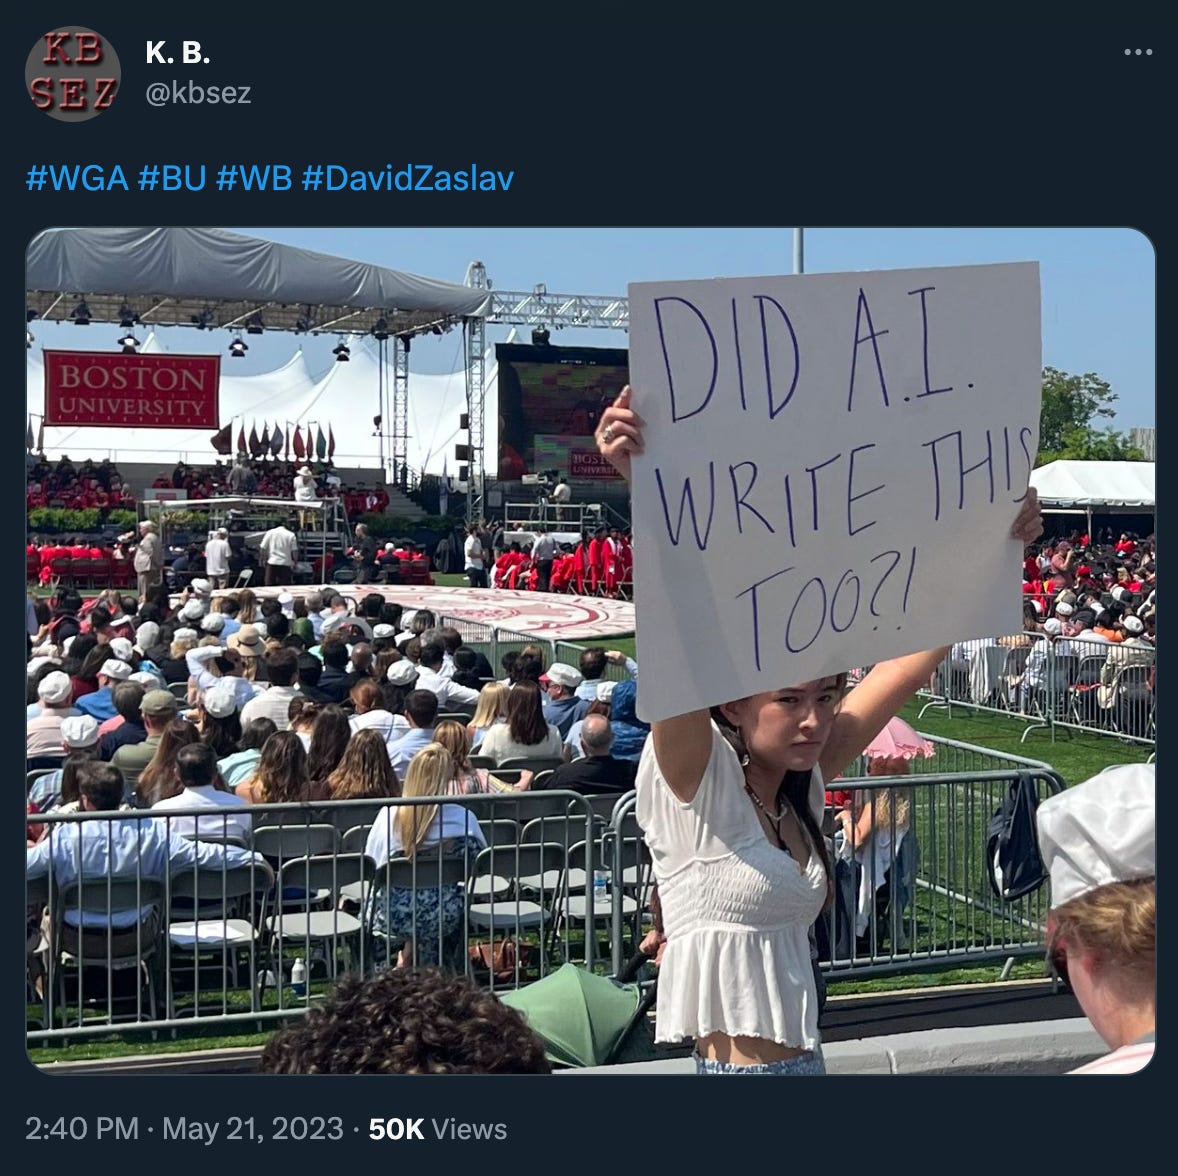 A young woman holds up a hand-drawn sign at the BU graduation that reads “DID A.I. WRITE THIS TOO?!”